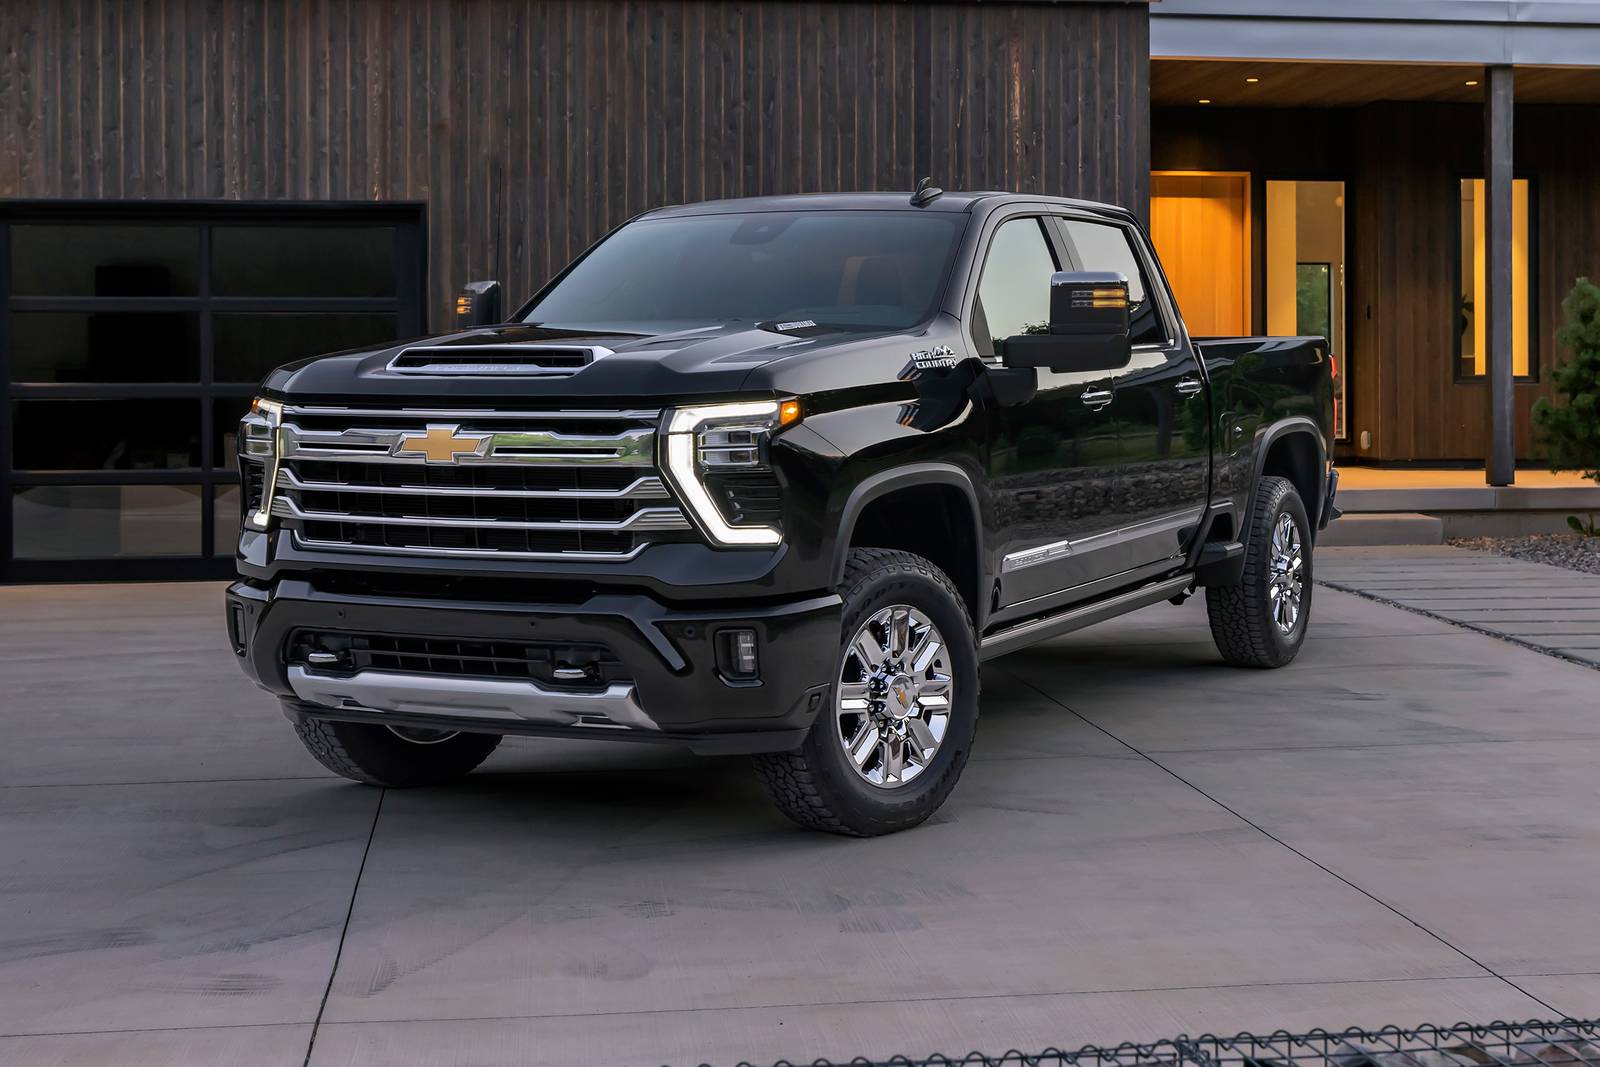 Chevy　Pictures　Edmunds　Reviews,　2024　Prices,　2500HD　Silverado　and